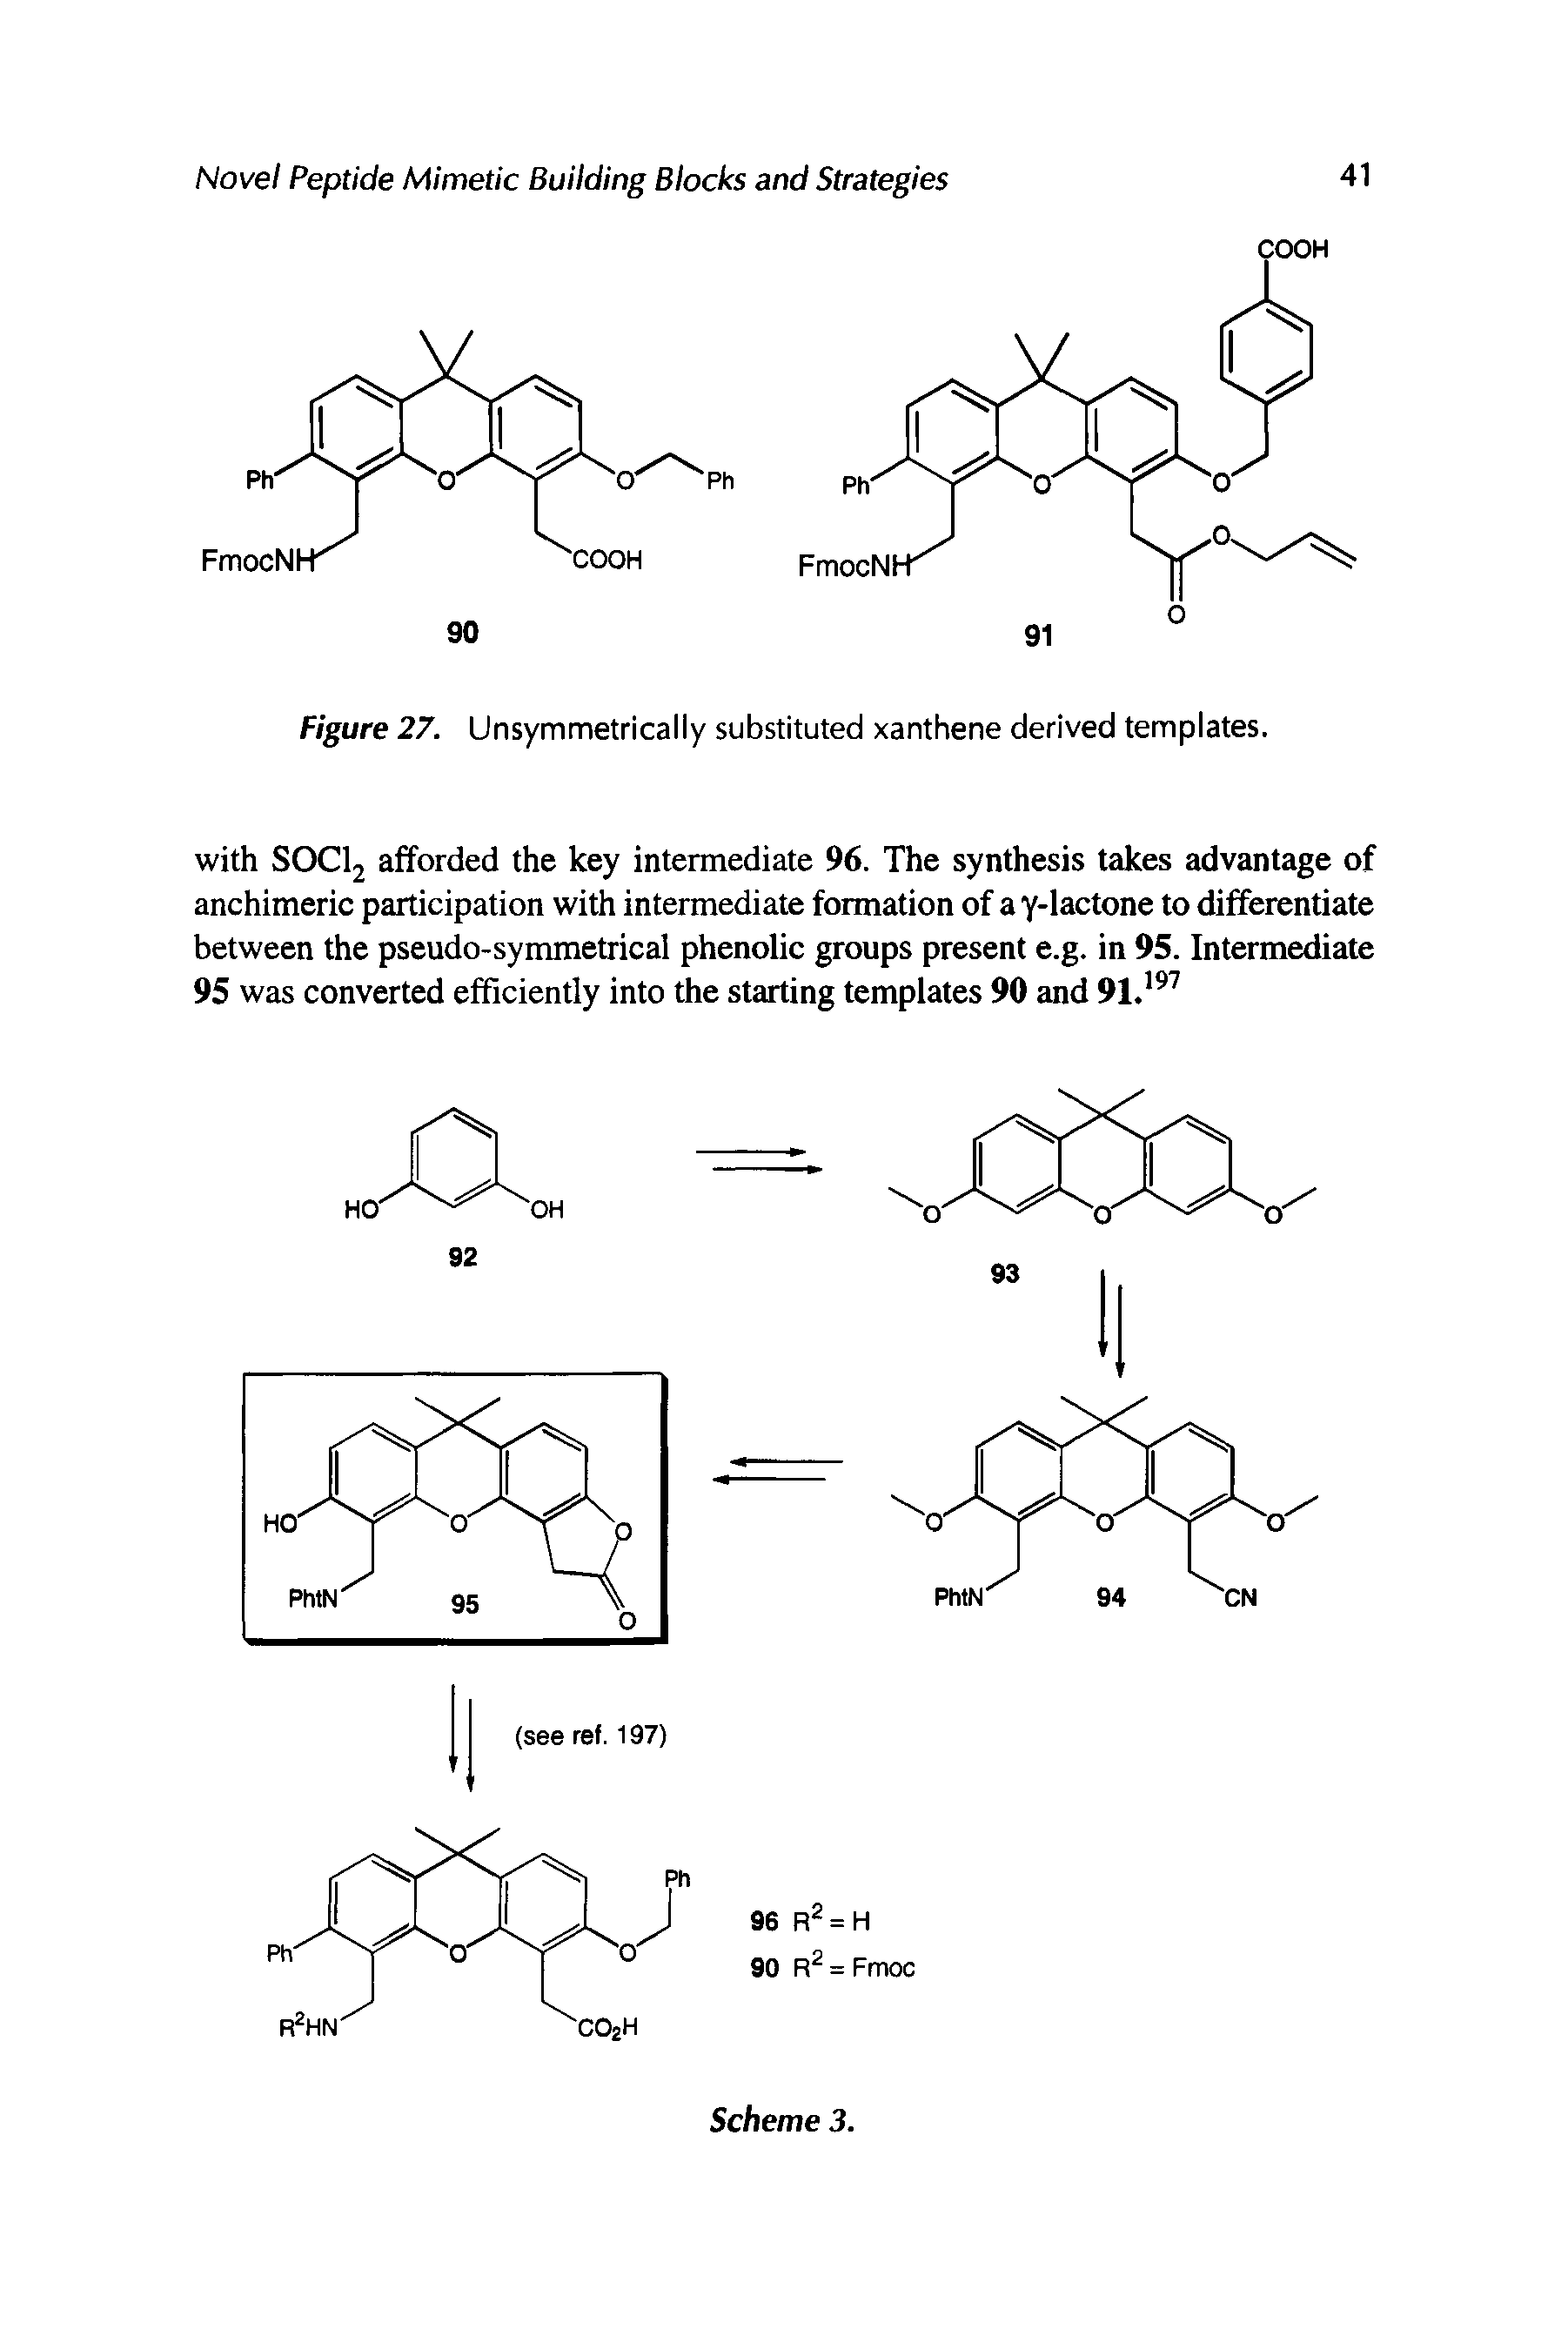 Figure 27. Unsymmetrically substituted xanthene derived templates.